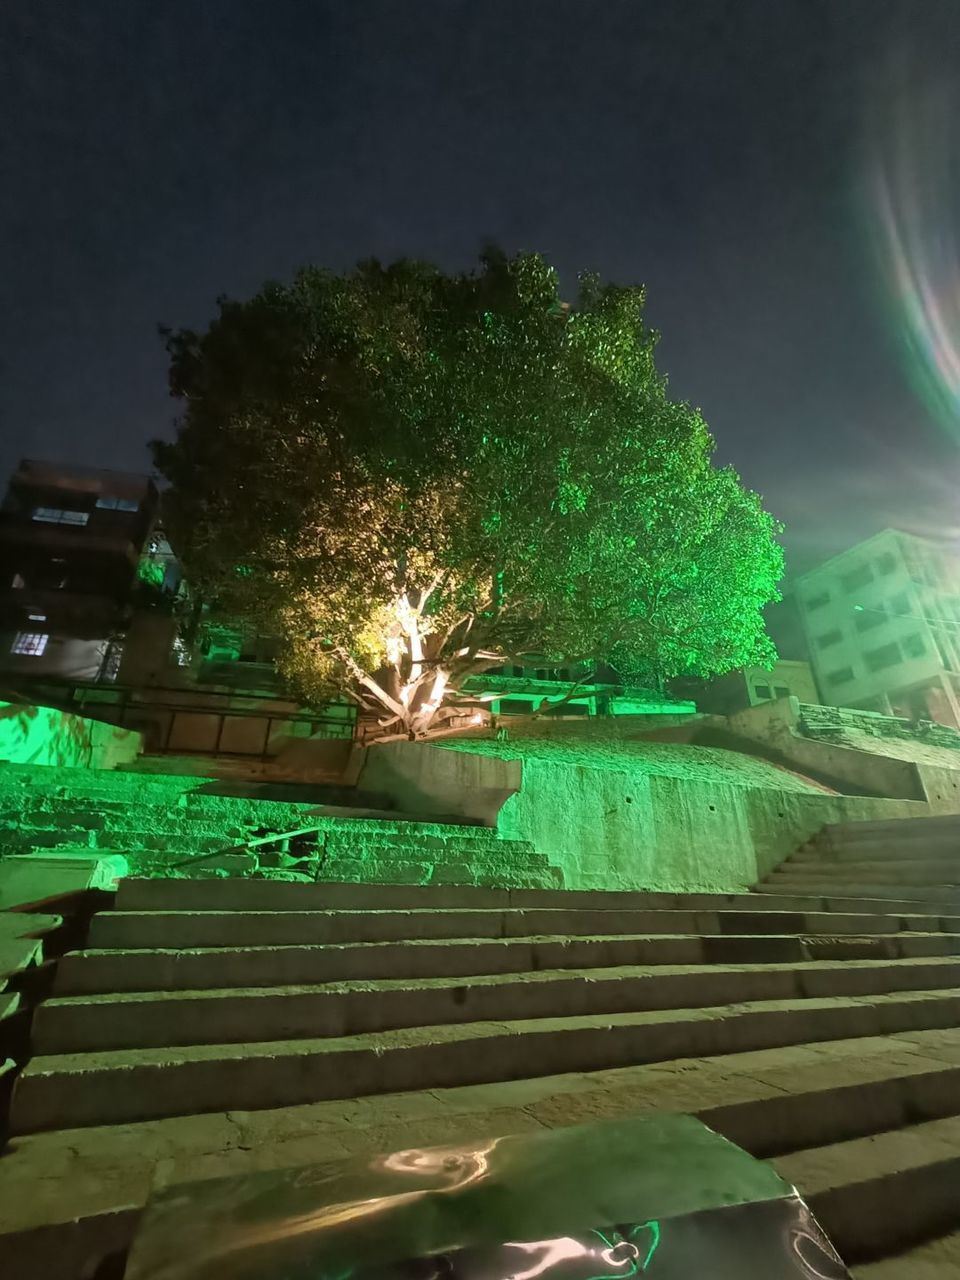 green, light, night, illuminated, tree, architecture, plant, screenshot, nature, built structure, no people, darkness, outdoors, building exterior, sky, city, reflection